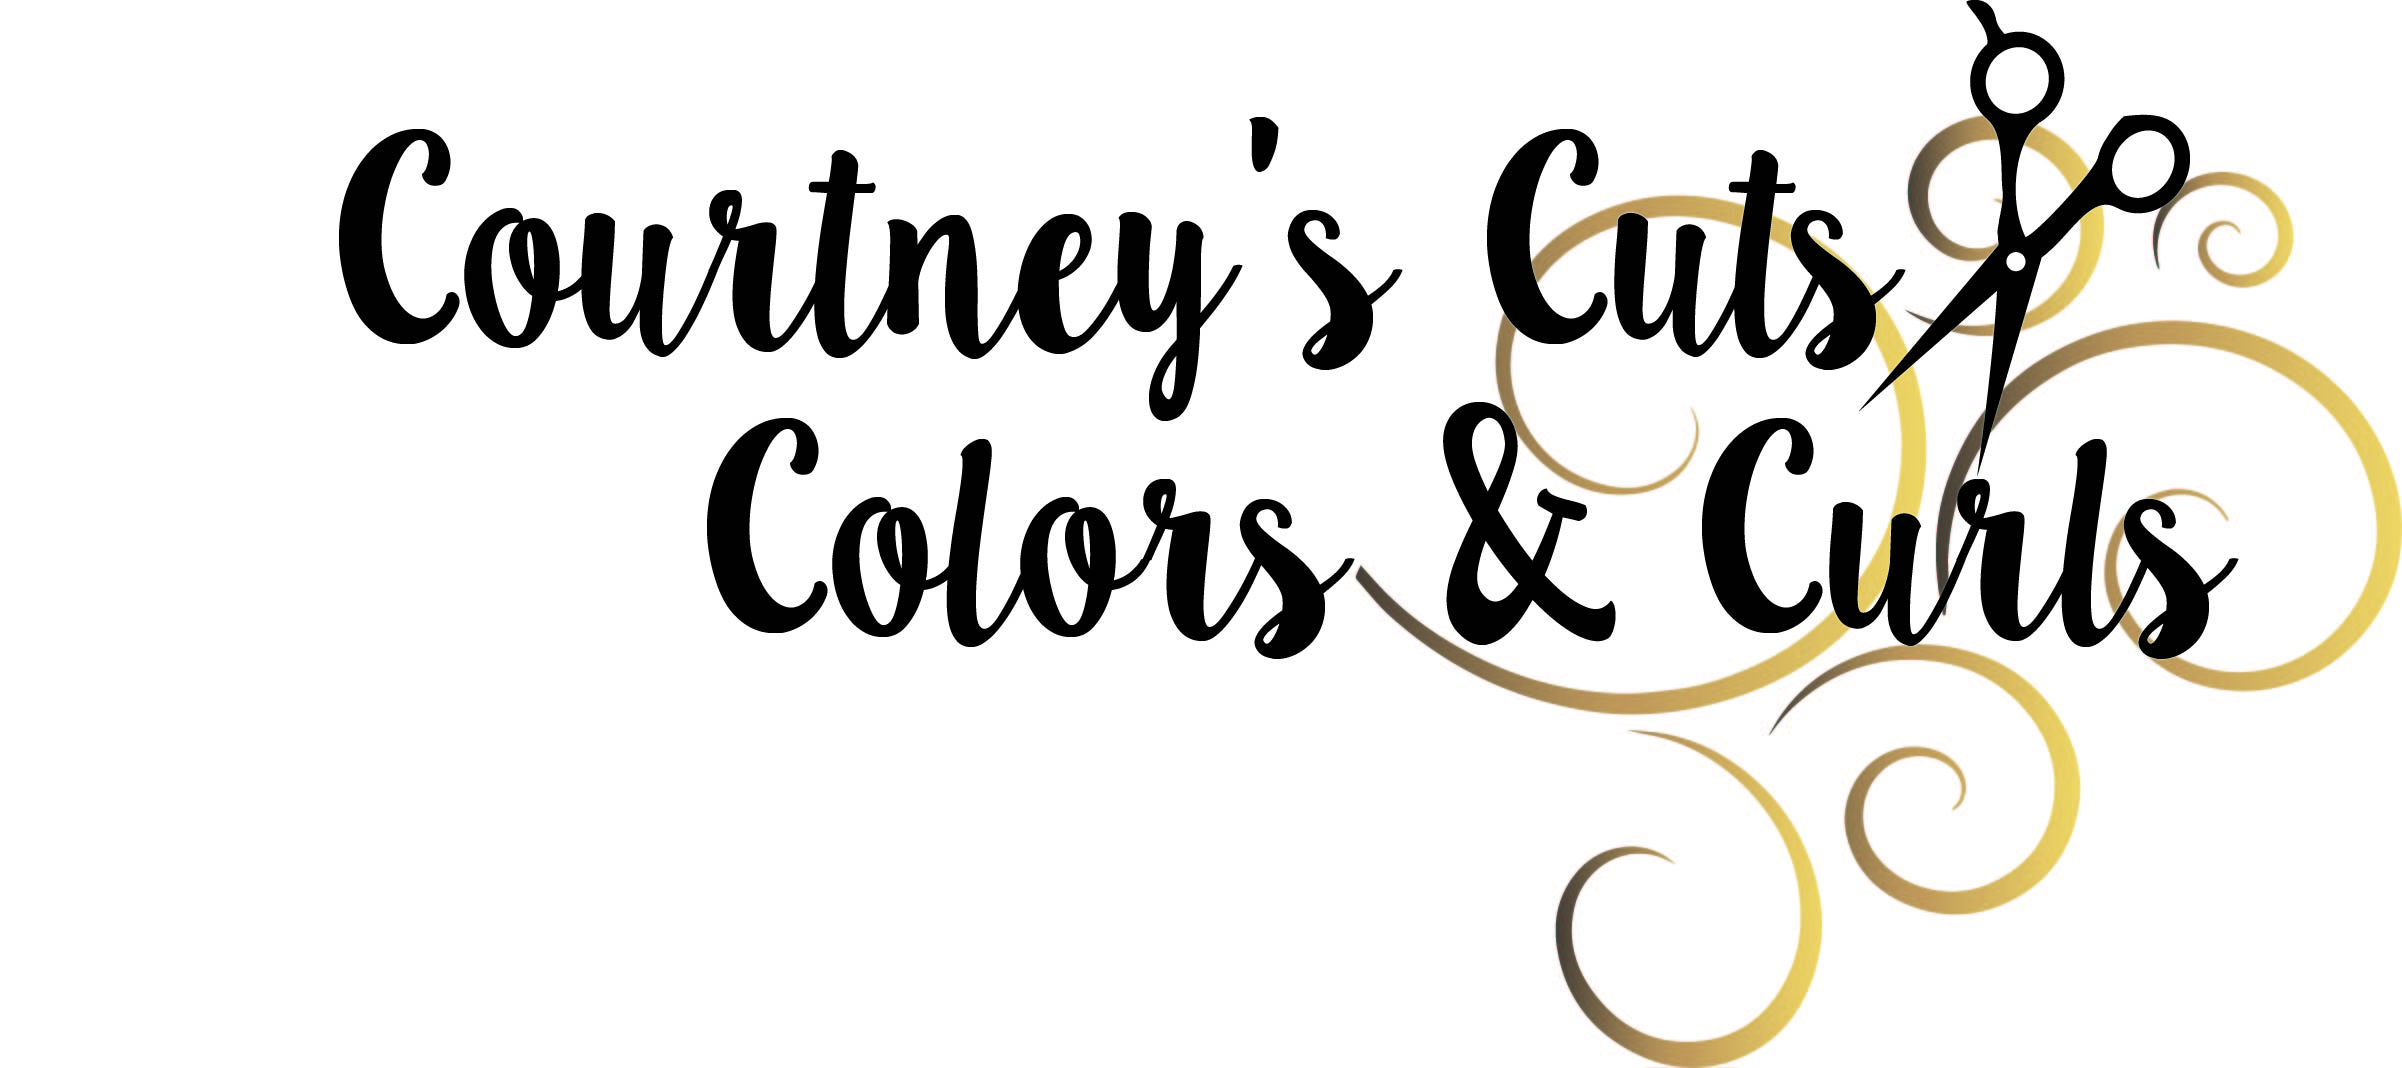 Courtney's Colors, Cuts, And Curls